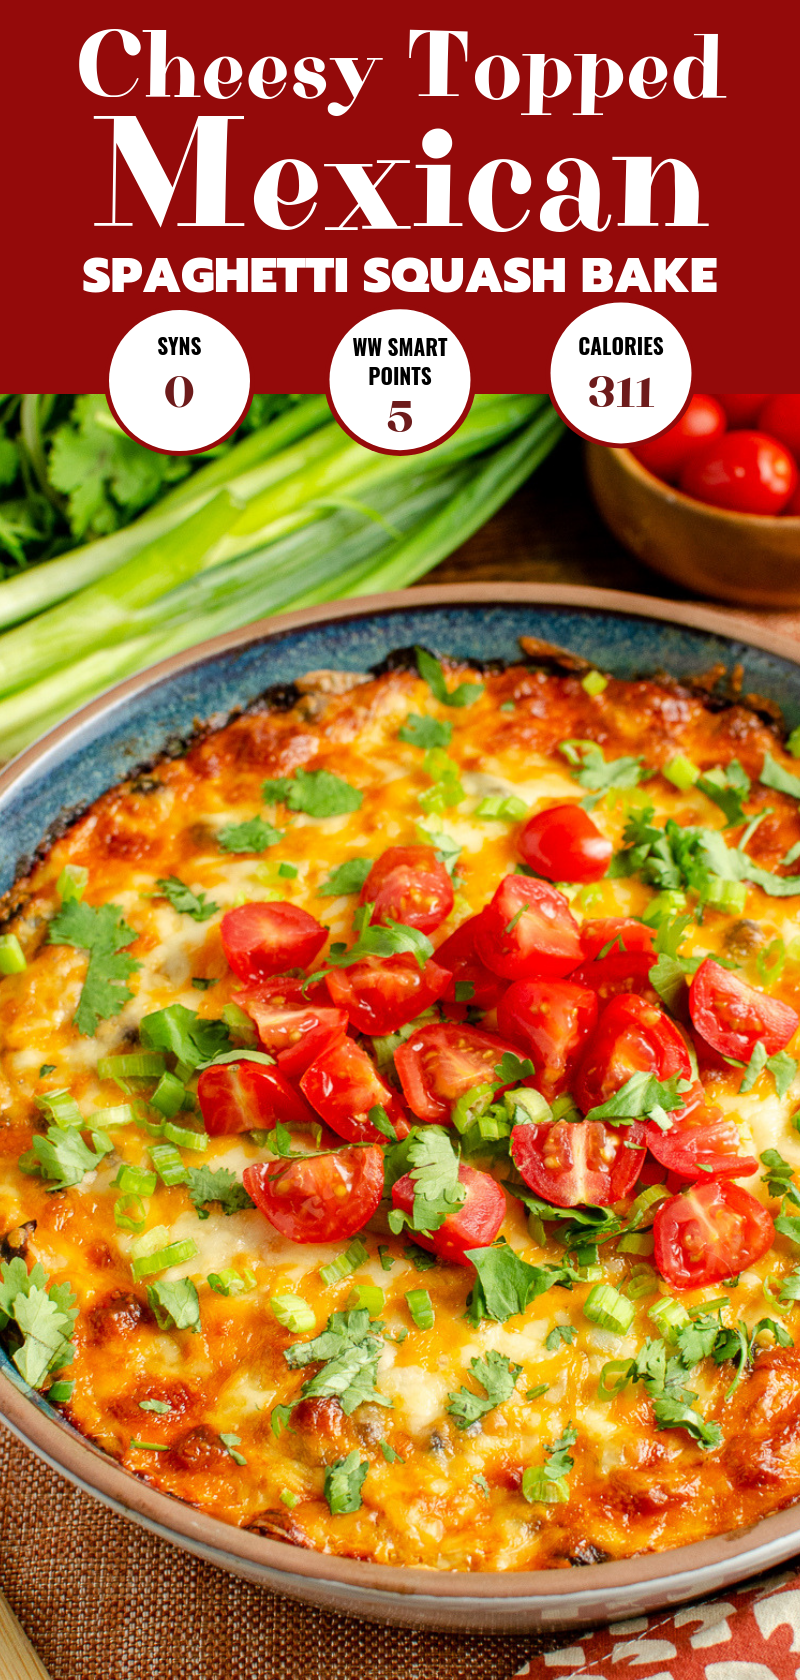 Mexican spaghetti squash bake in oven dish topped with tomatoes and coriander